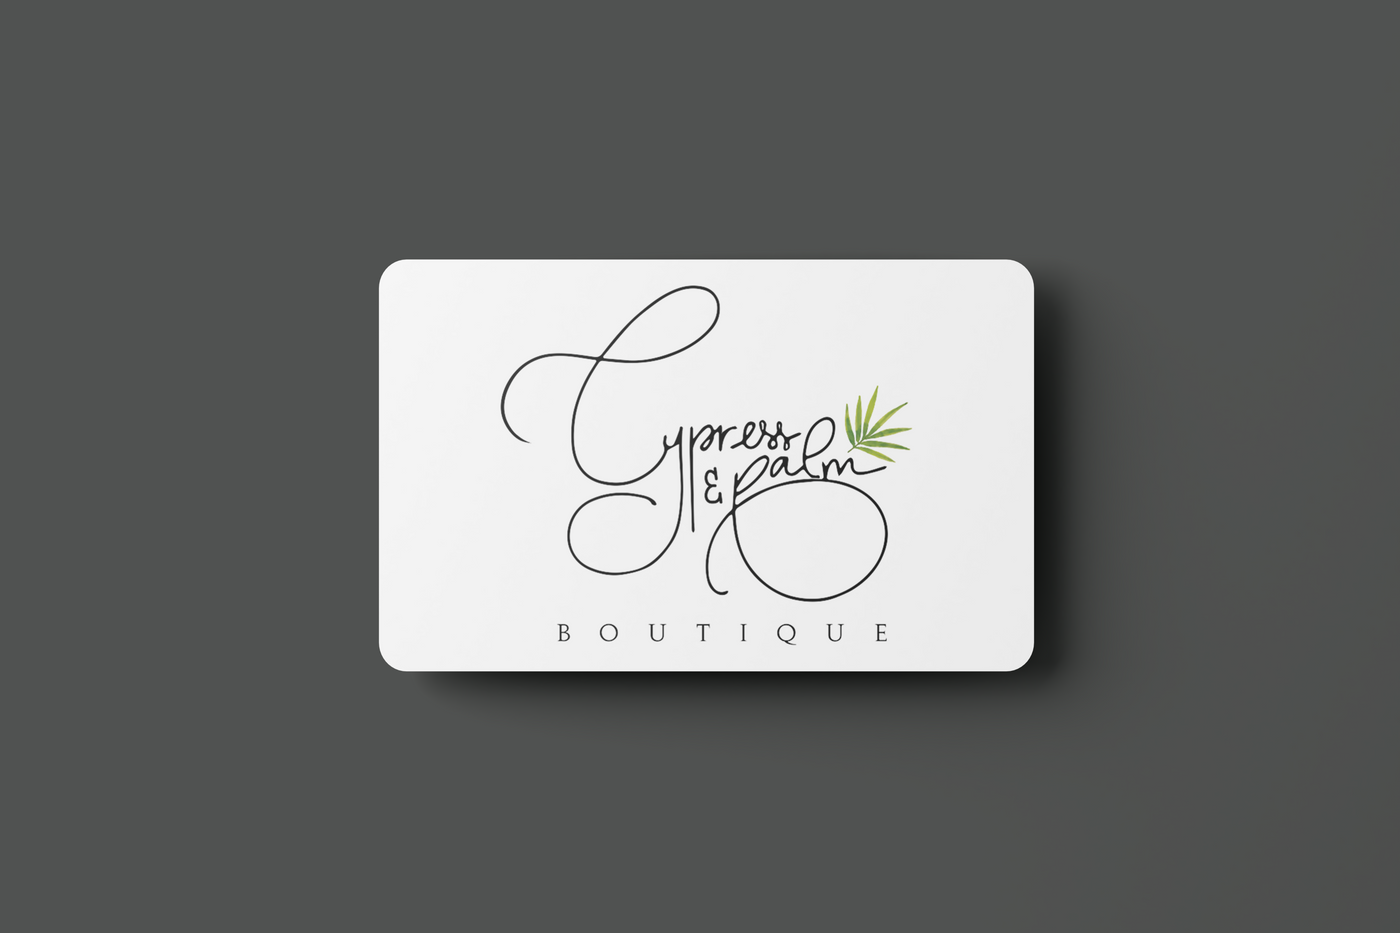 Cypress and Palm Boutique Gift Card